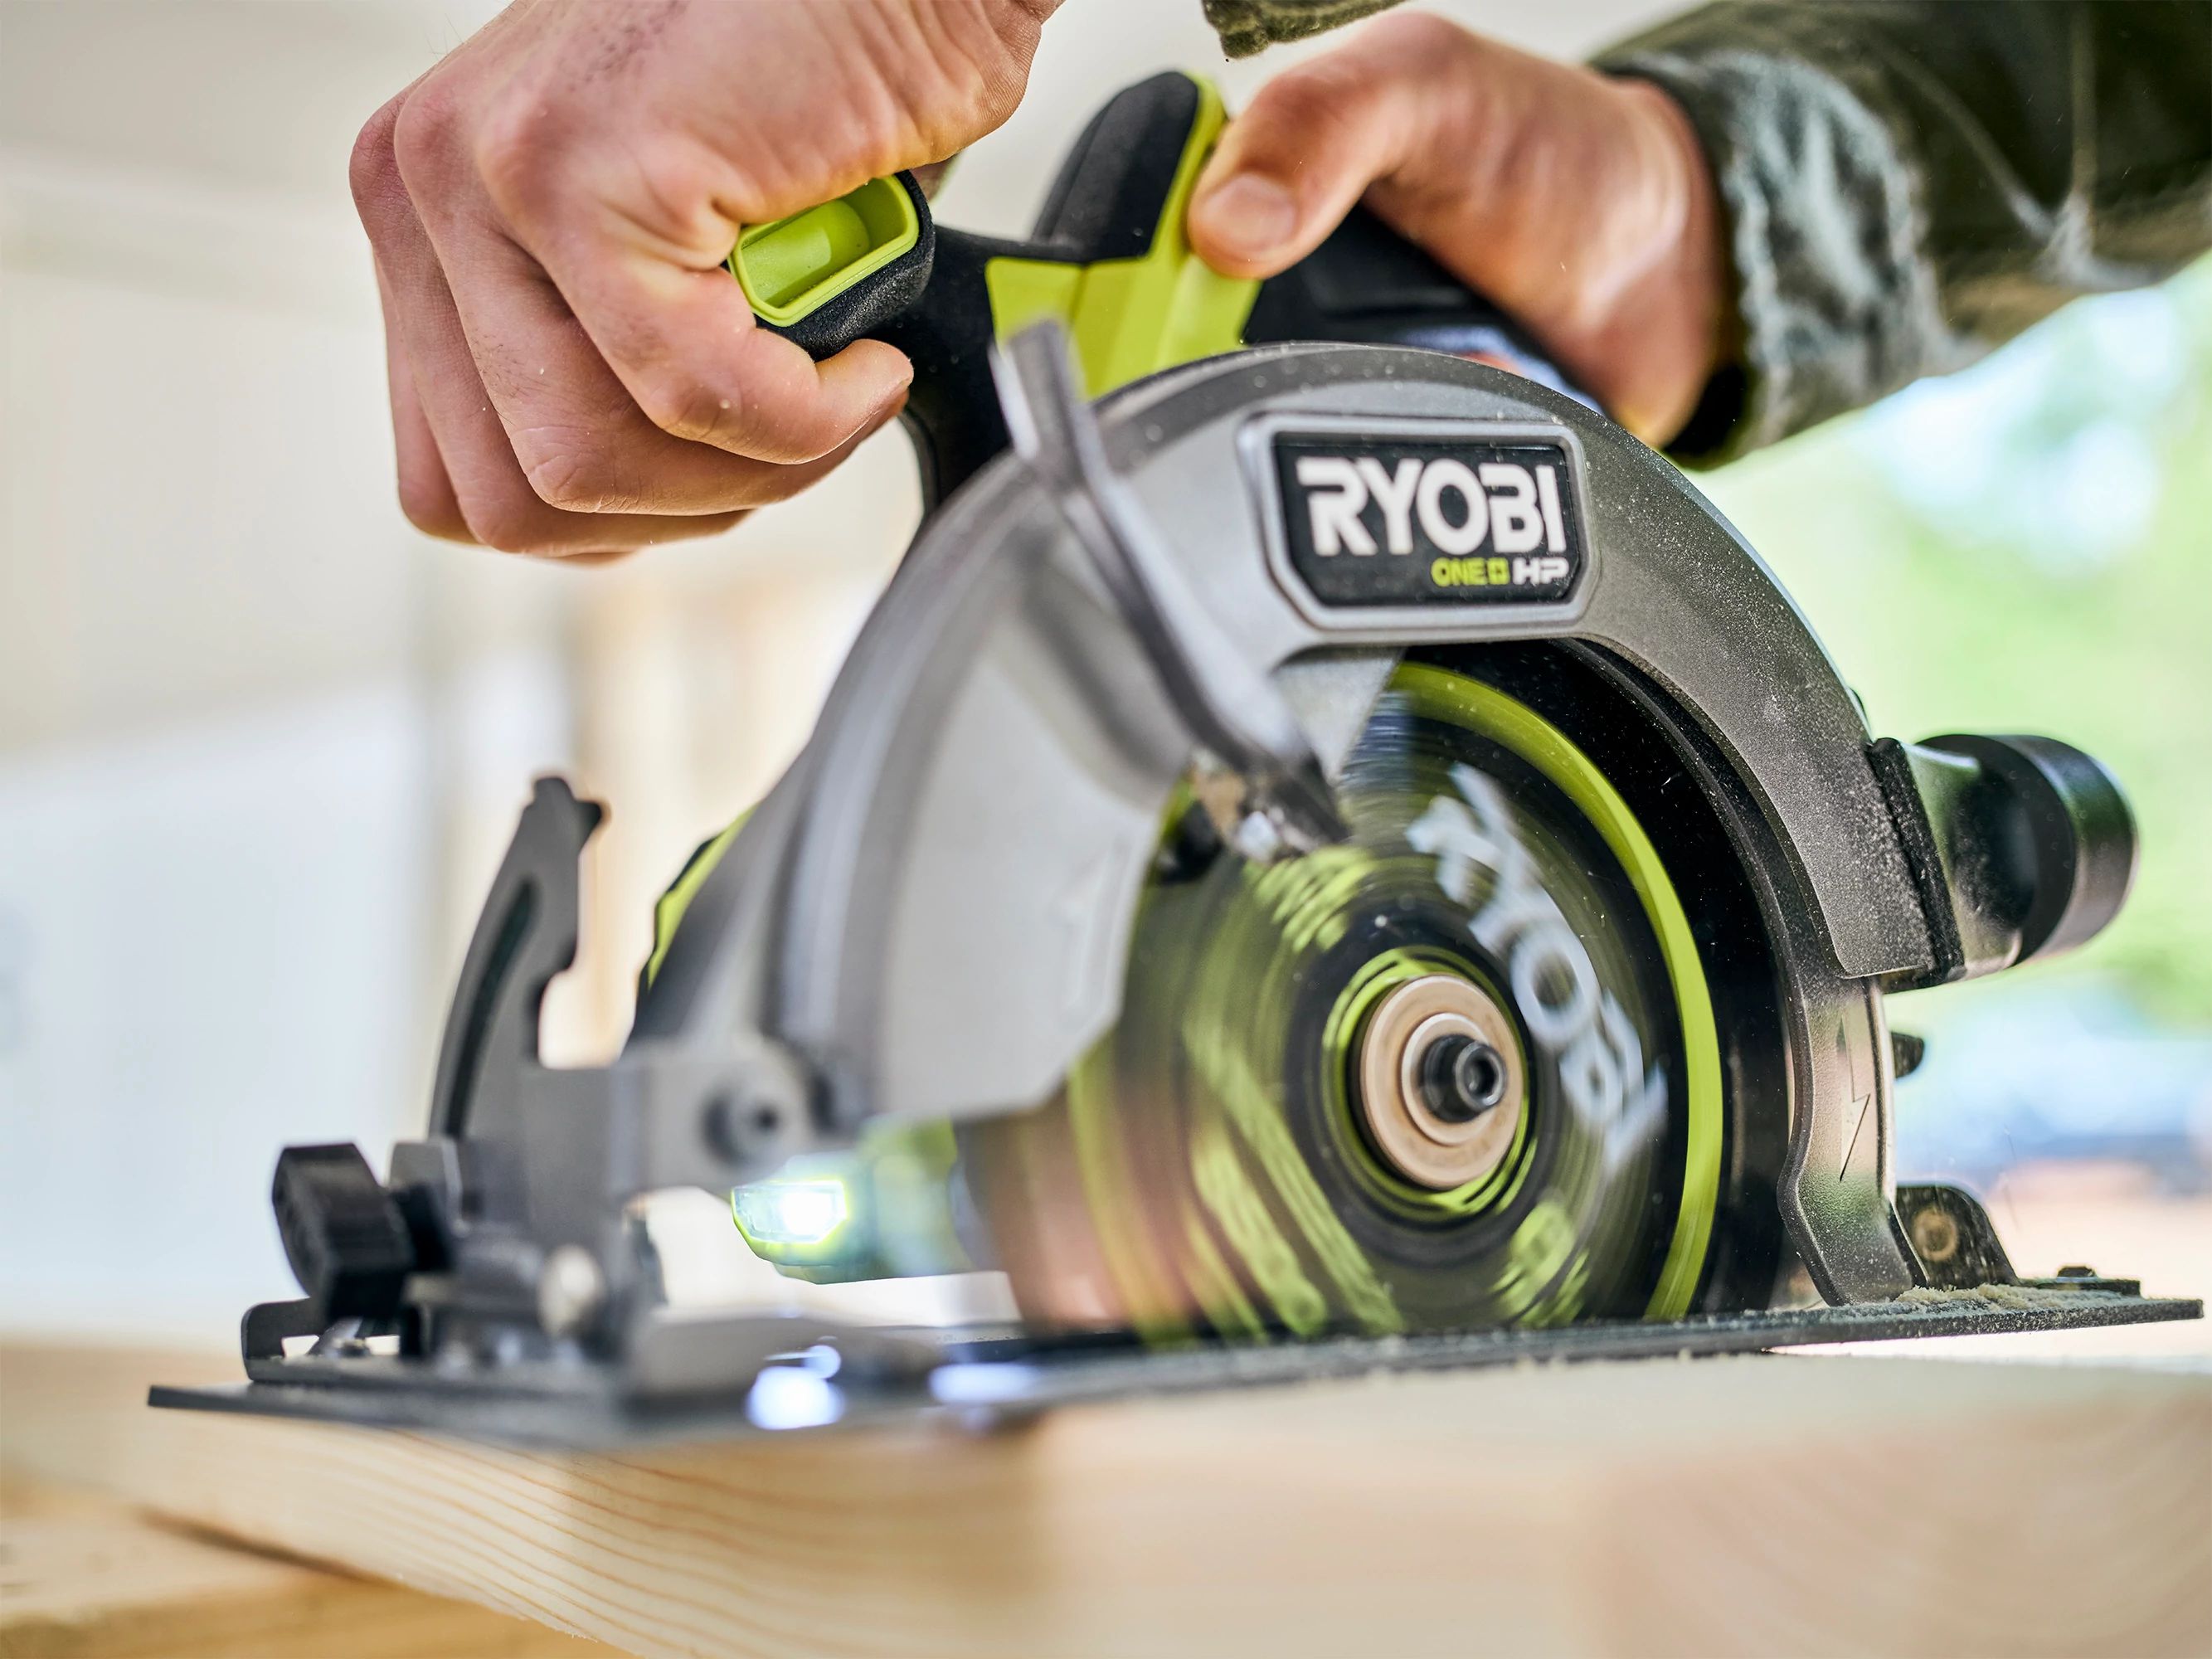 RYOBI 18-Volt ONE+ Lithium-Ion Cordless 6-1/2 in. Circular Saw and